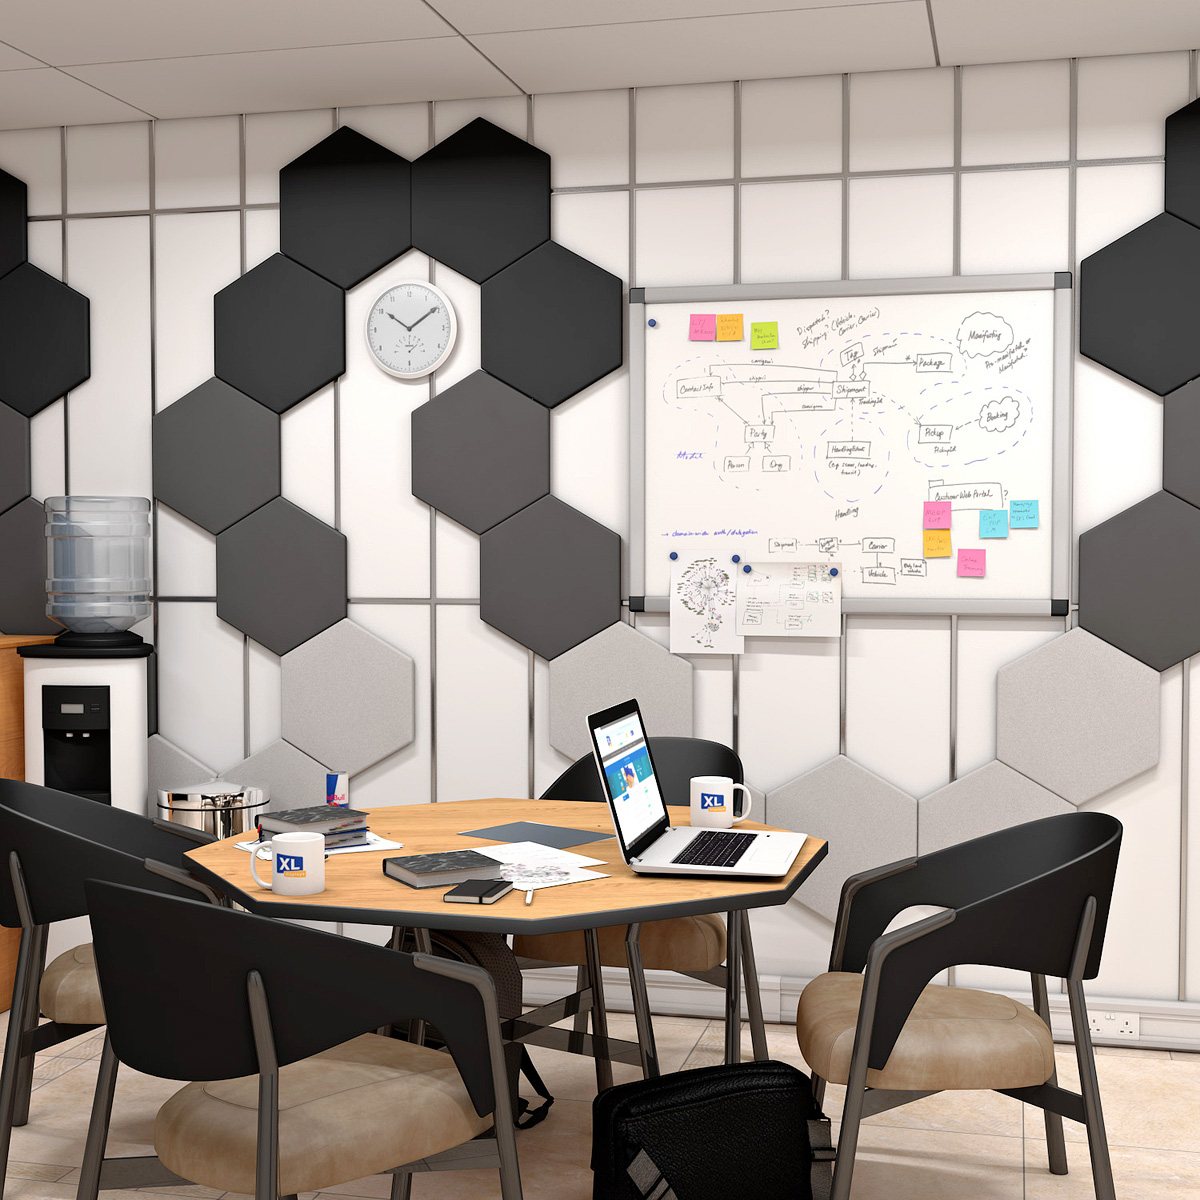 ZAGATO™ Acoustic Wall Panelling Are Functional Sound Absorbing Panels For Reducing Noise & Office Distractions